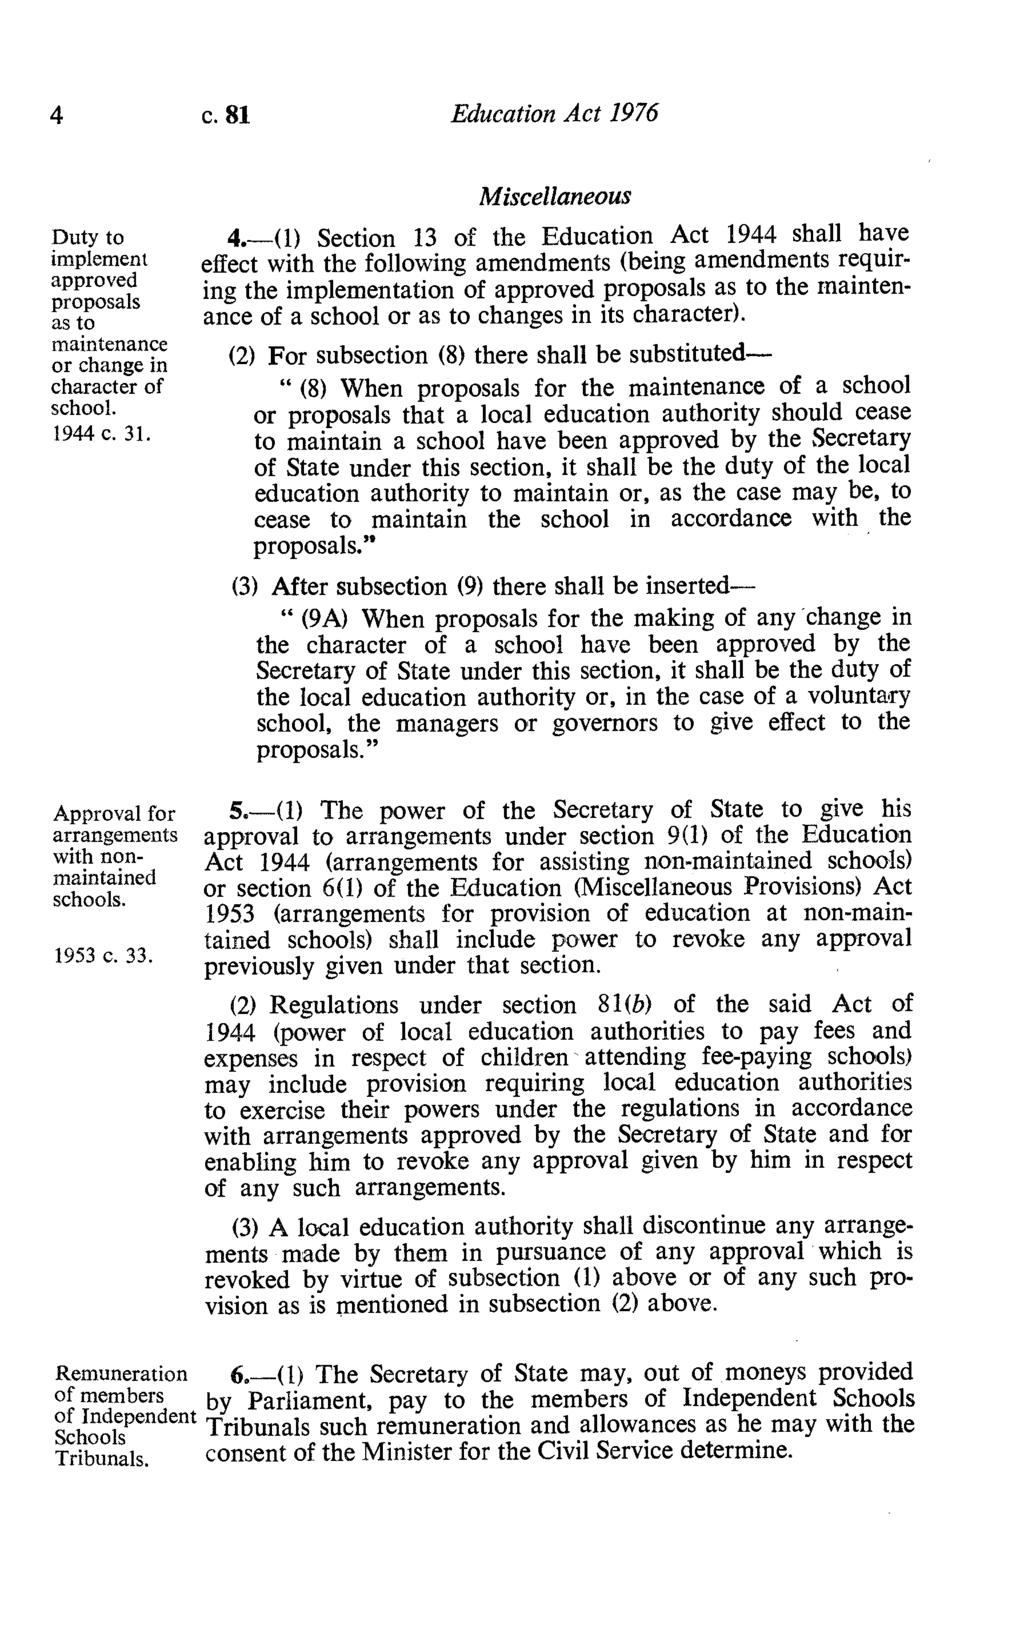 4 c. 81 Education Act 1976 Duty to implement approved proposals as to maintenance or change in character of school. 1944 c. 31. Approval for arrangements with nonmaintained schools. 1953 c. 33.